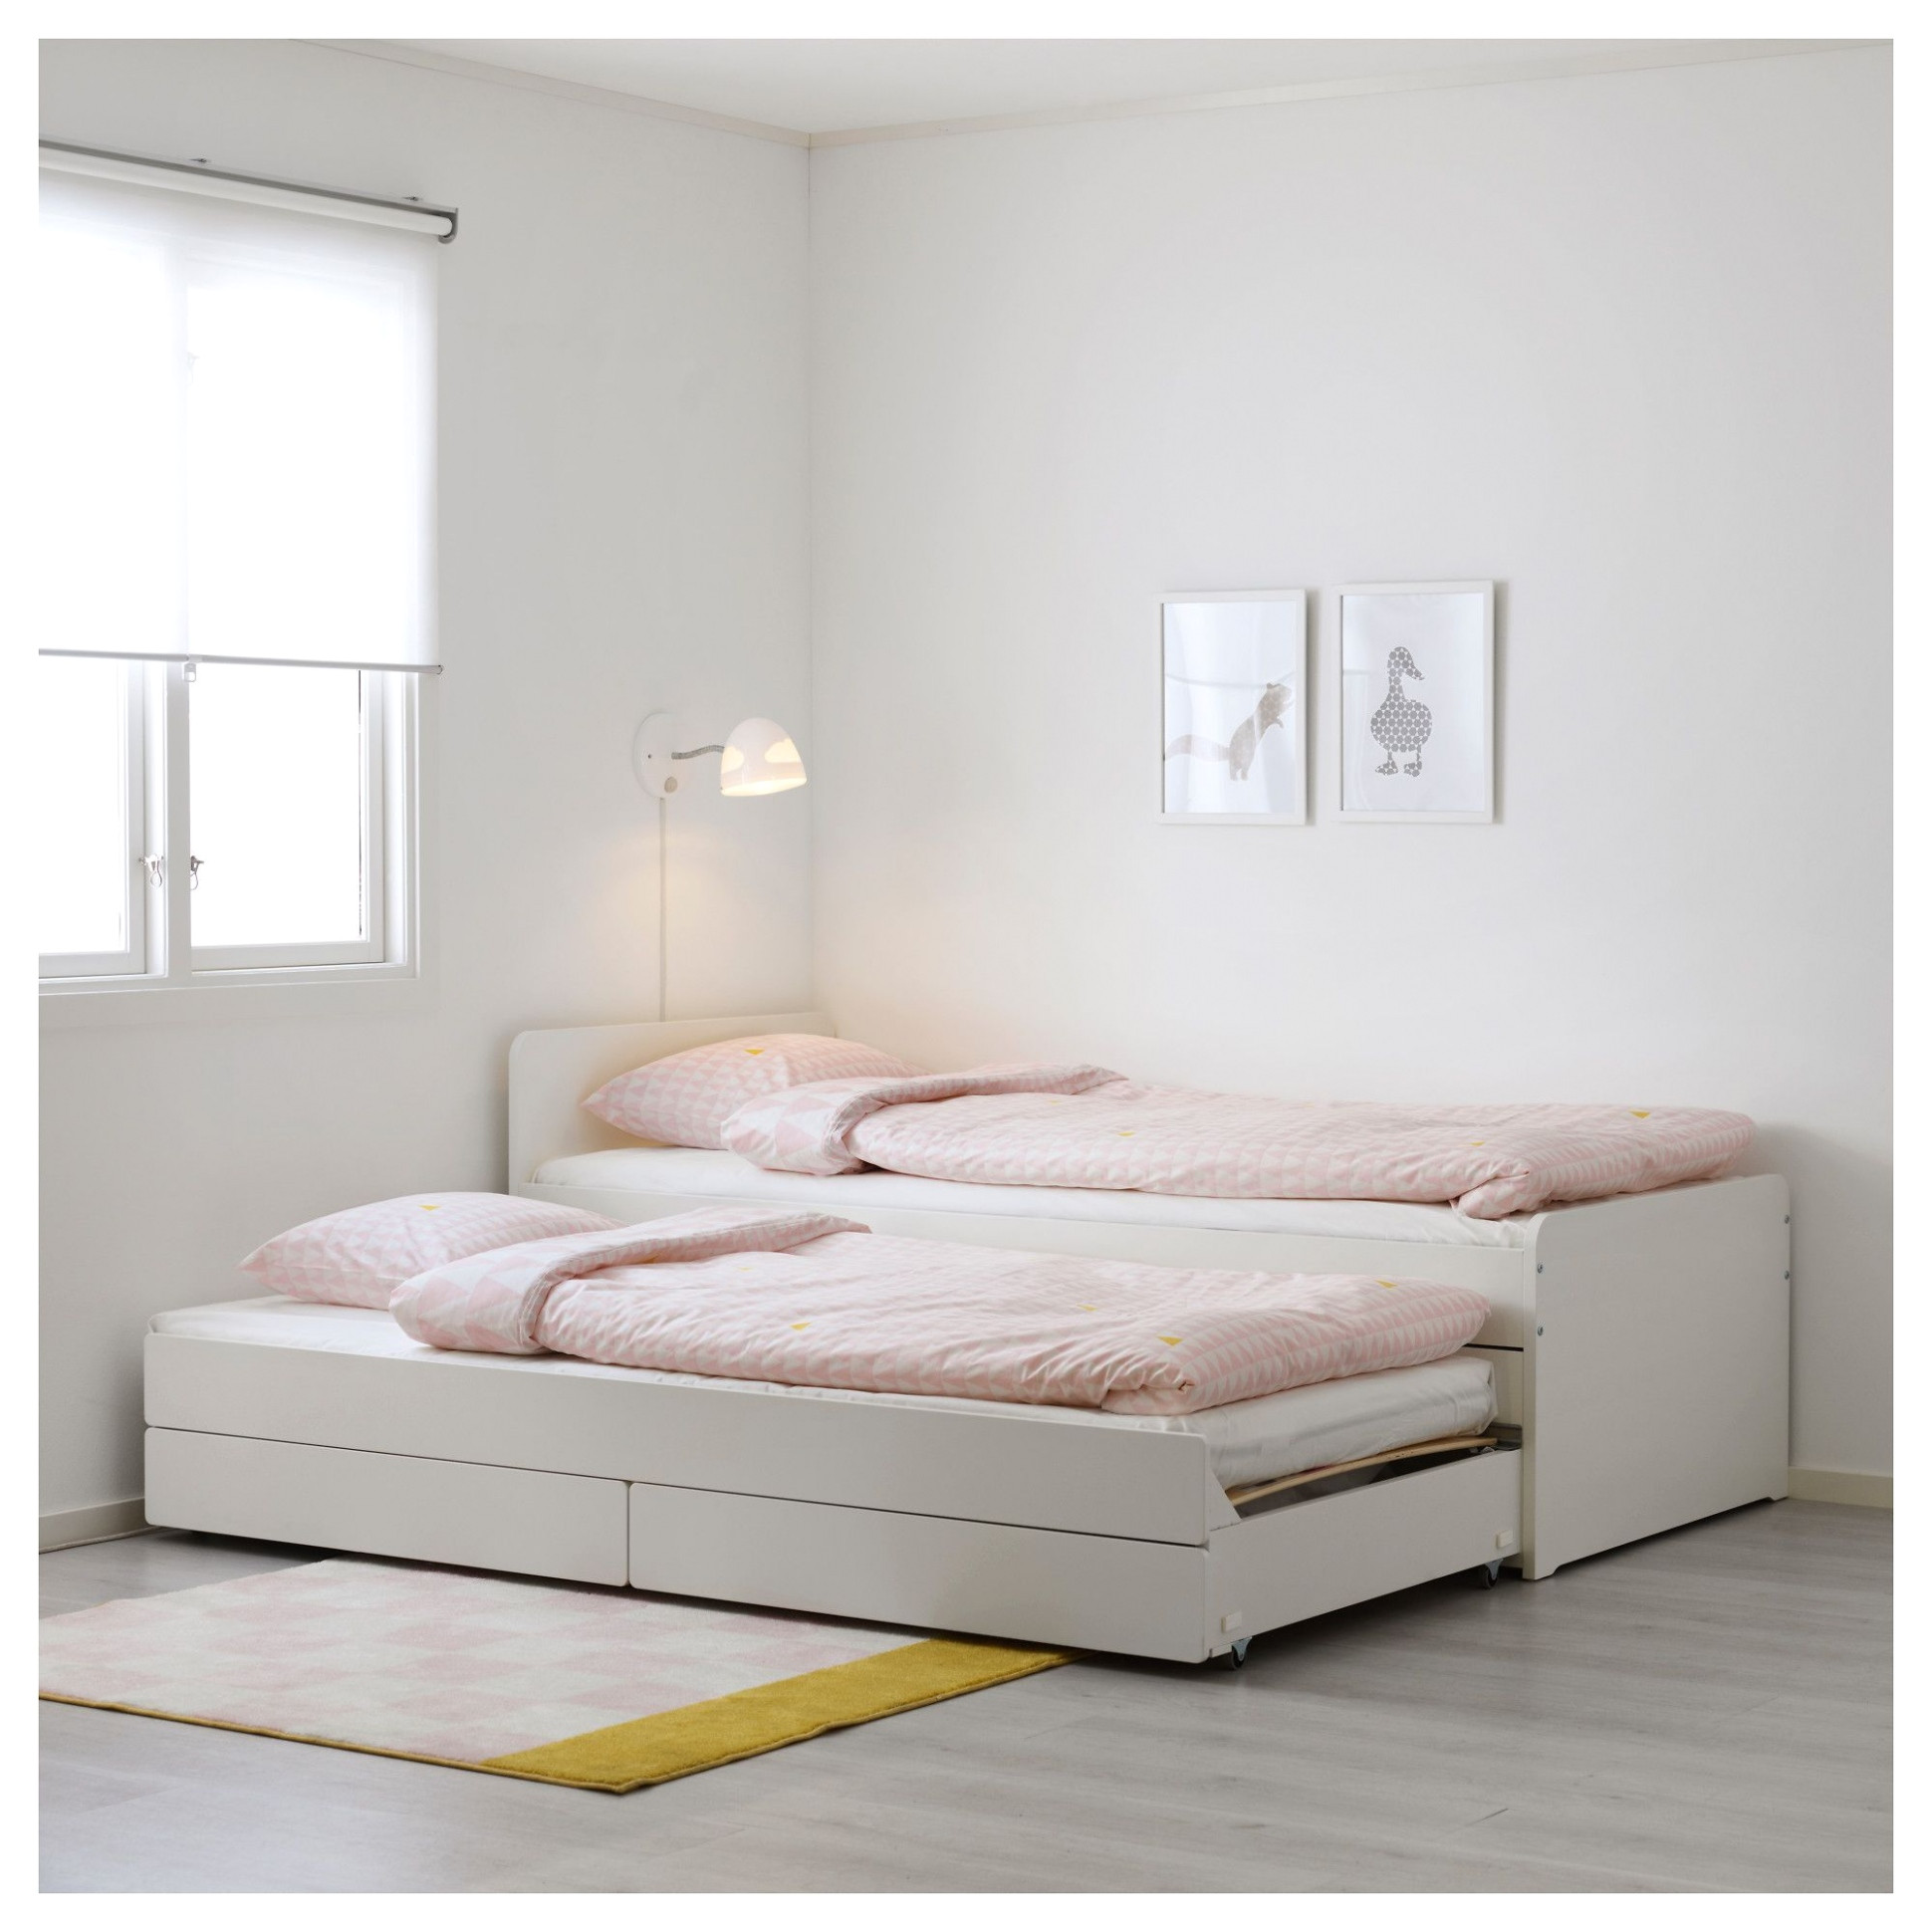 image of sl kt bed frame w pull out bed storage white bunk a image of twin